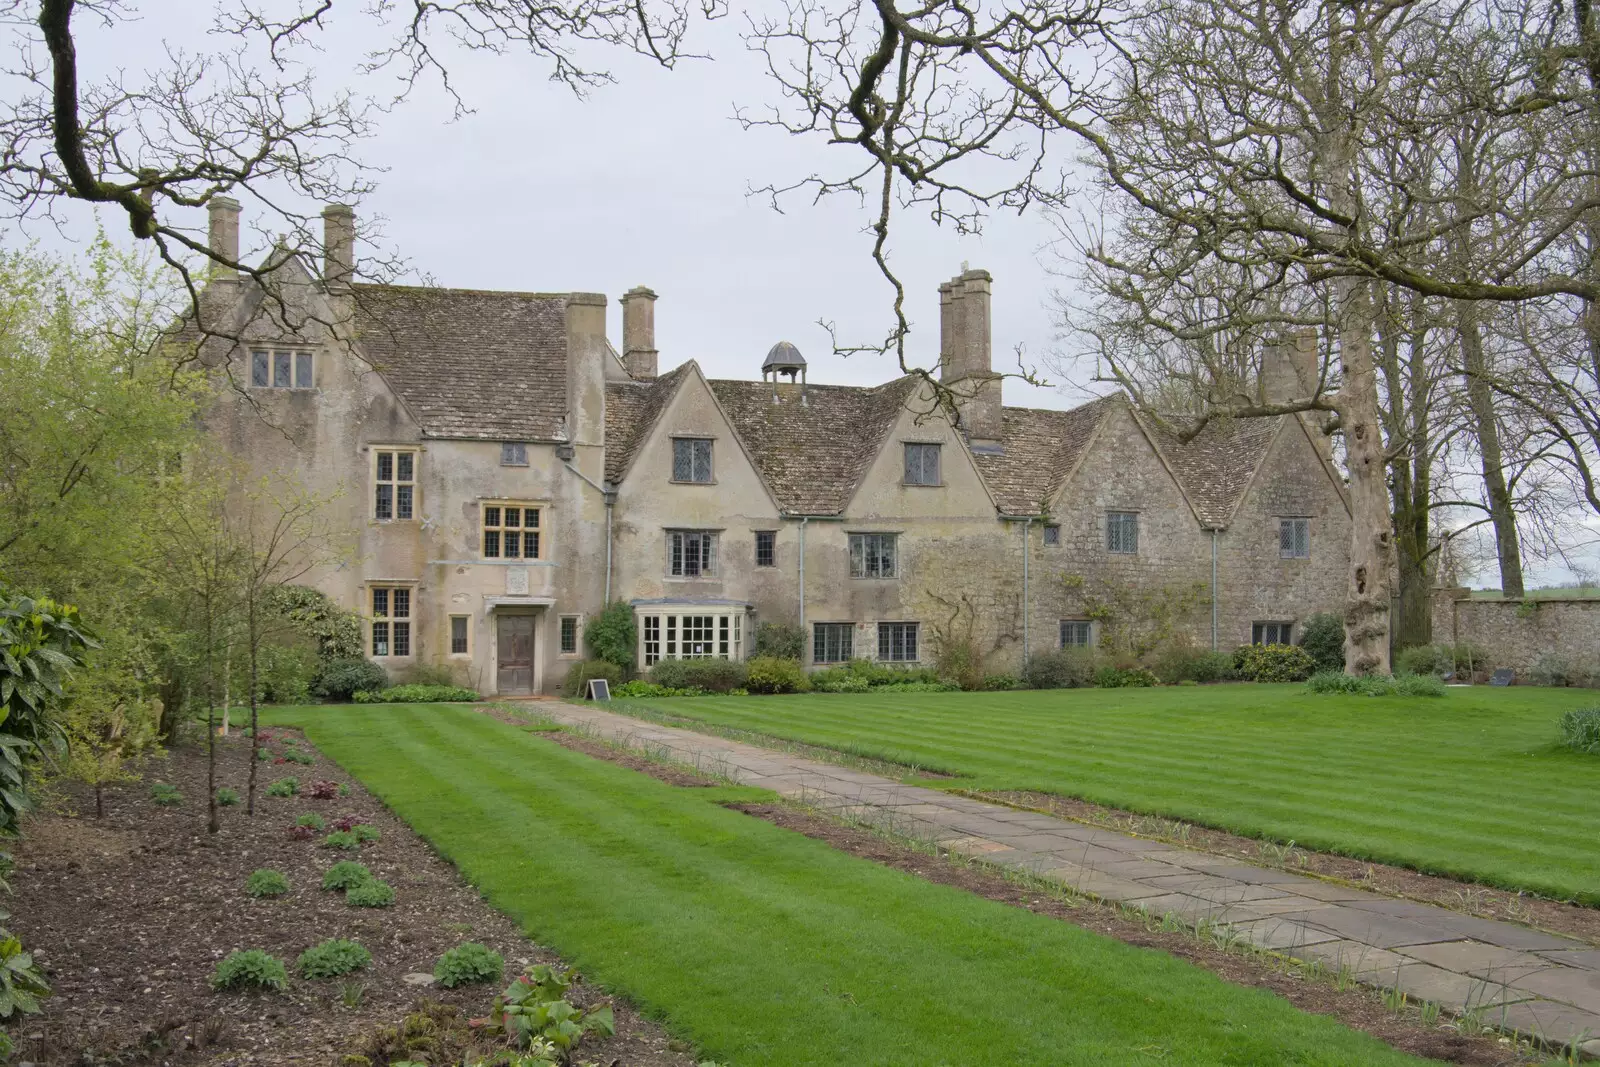 Avebury Manor, which was closed again, from A Postcard from Marlborough and a Walk on the Herepath, Avebury, Wiltshire - 8th April 2024